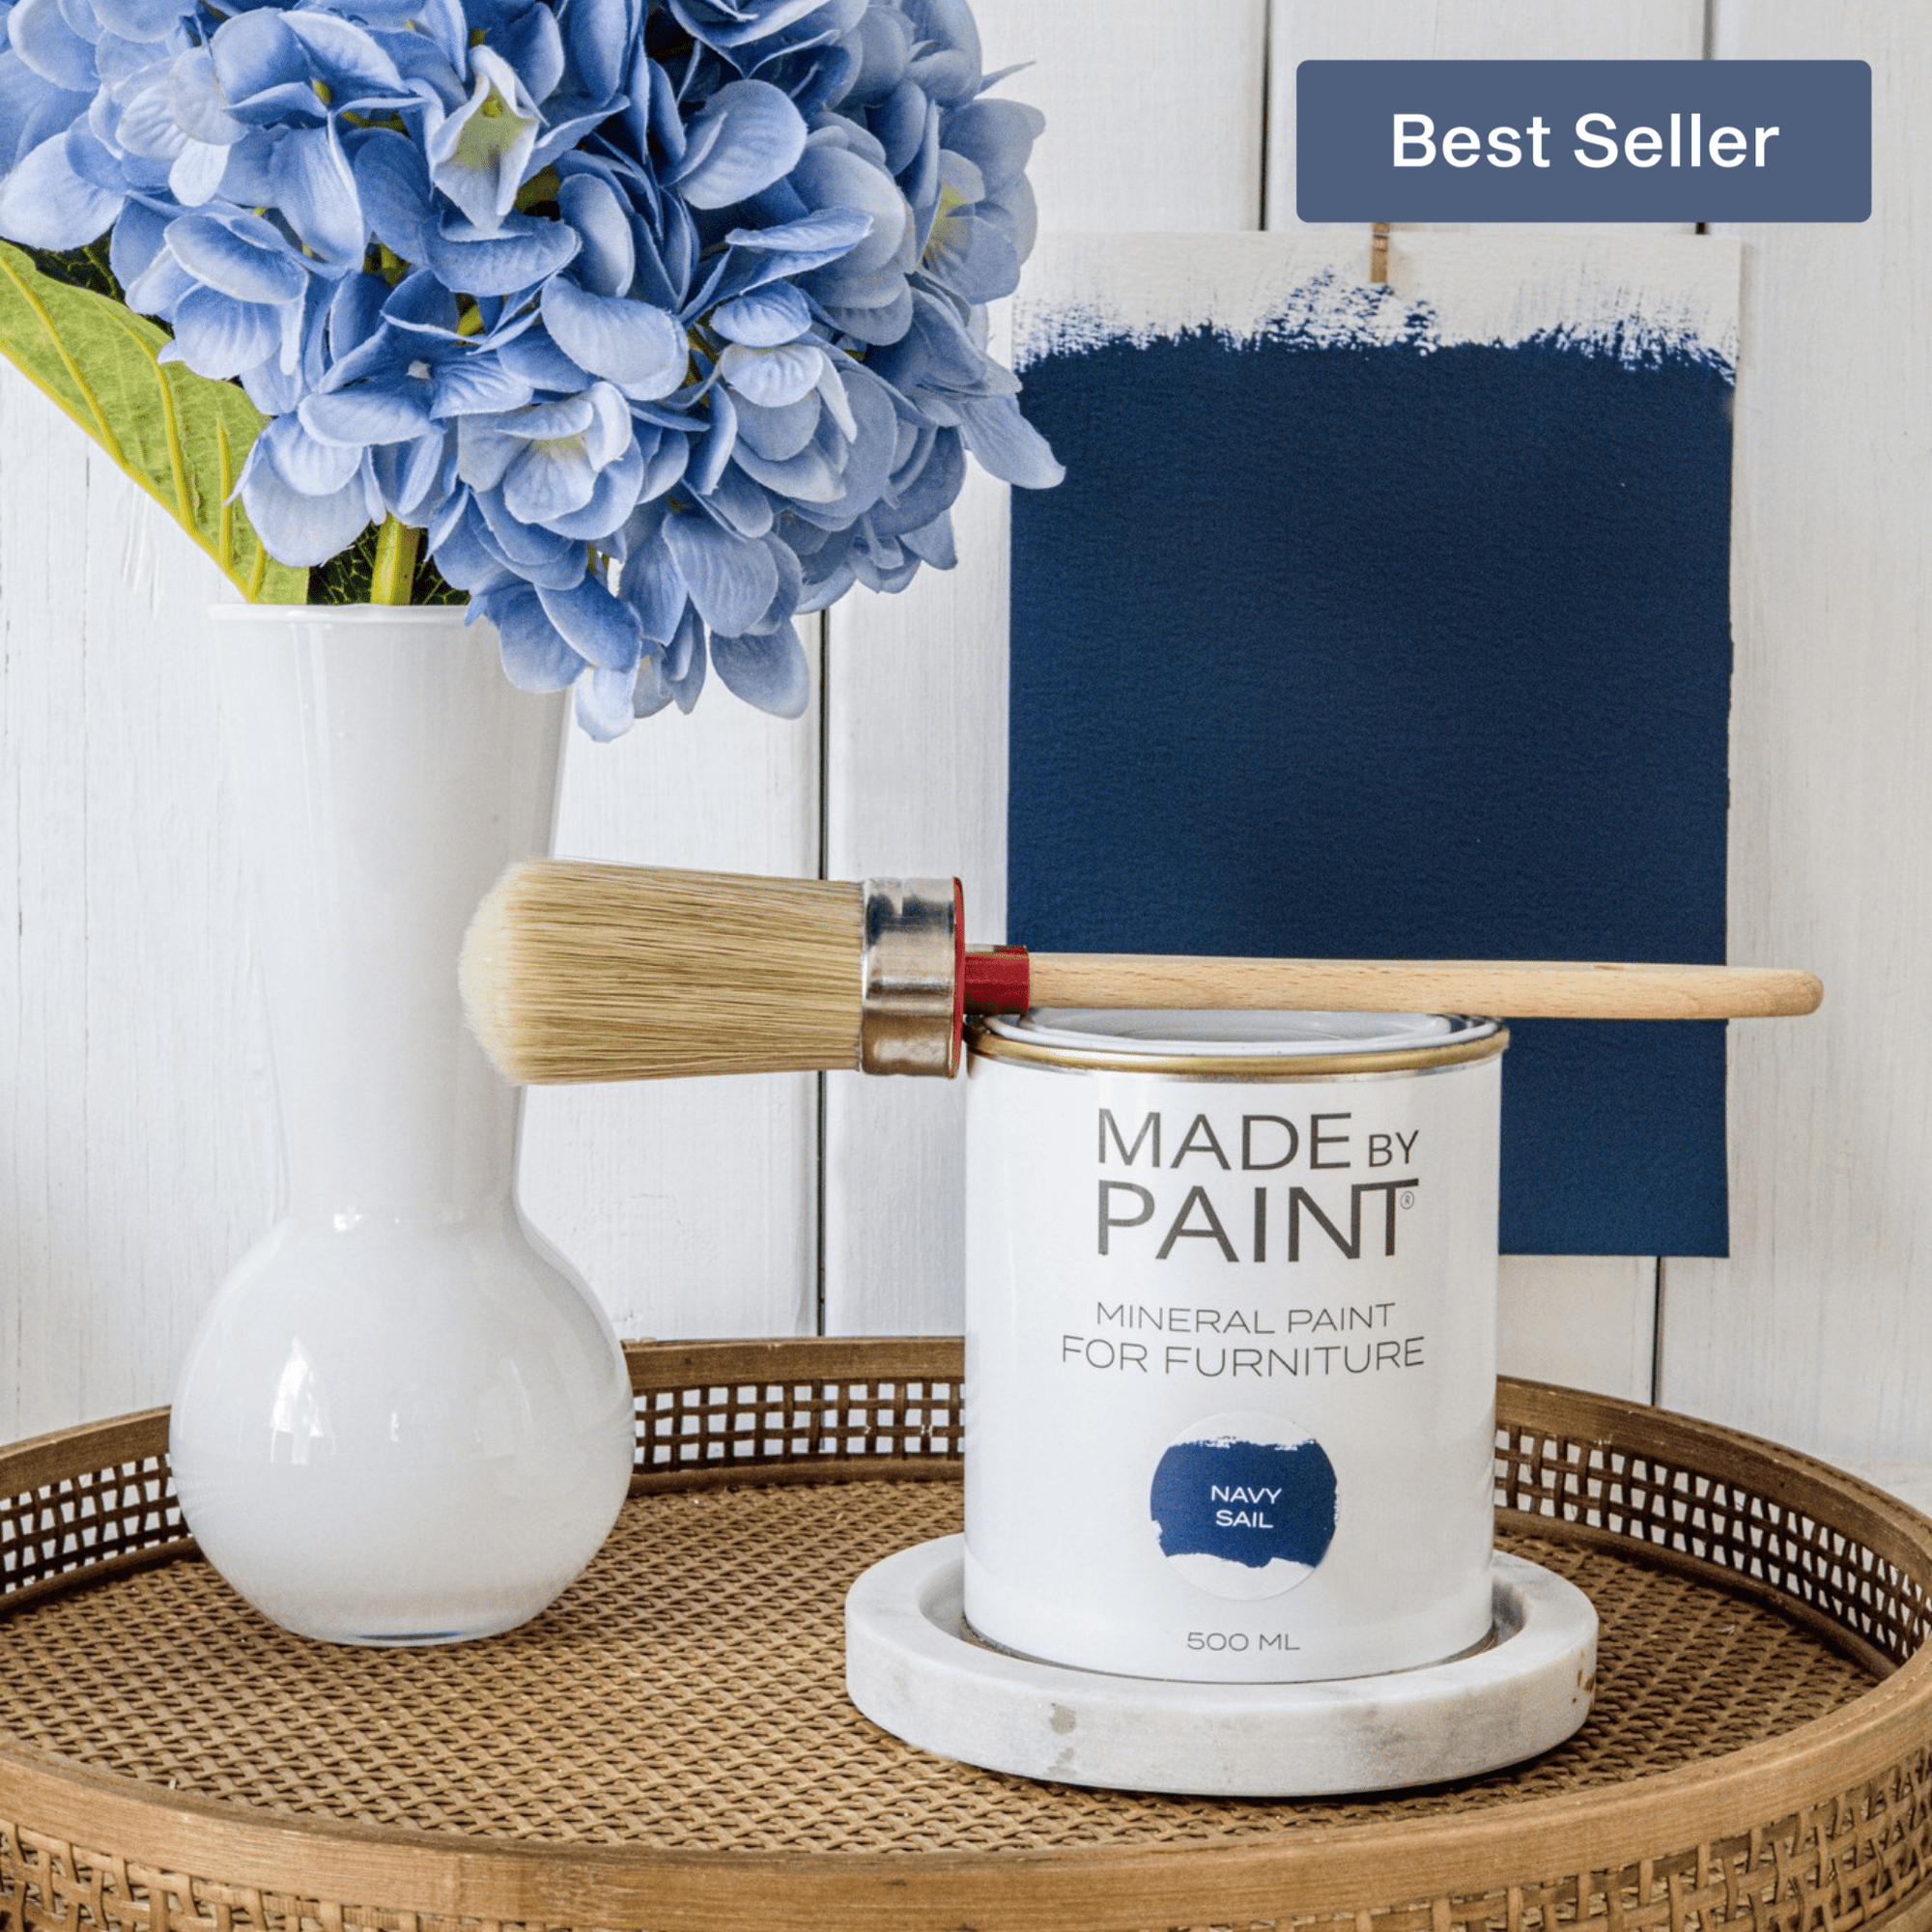 'Navy Sail' Mineral Paint, Made By Paint, 500ml (Navy)